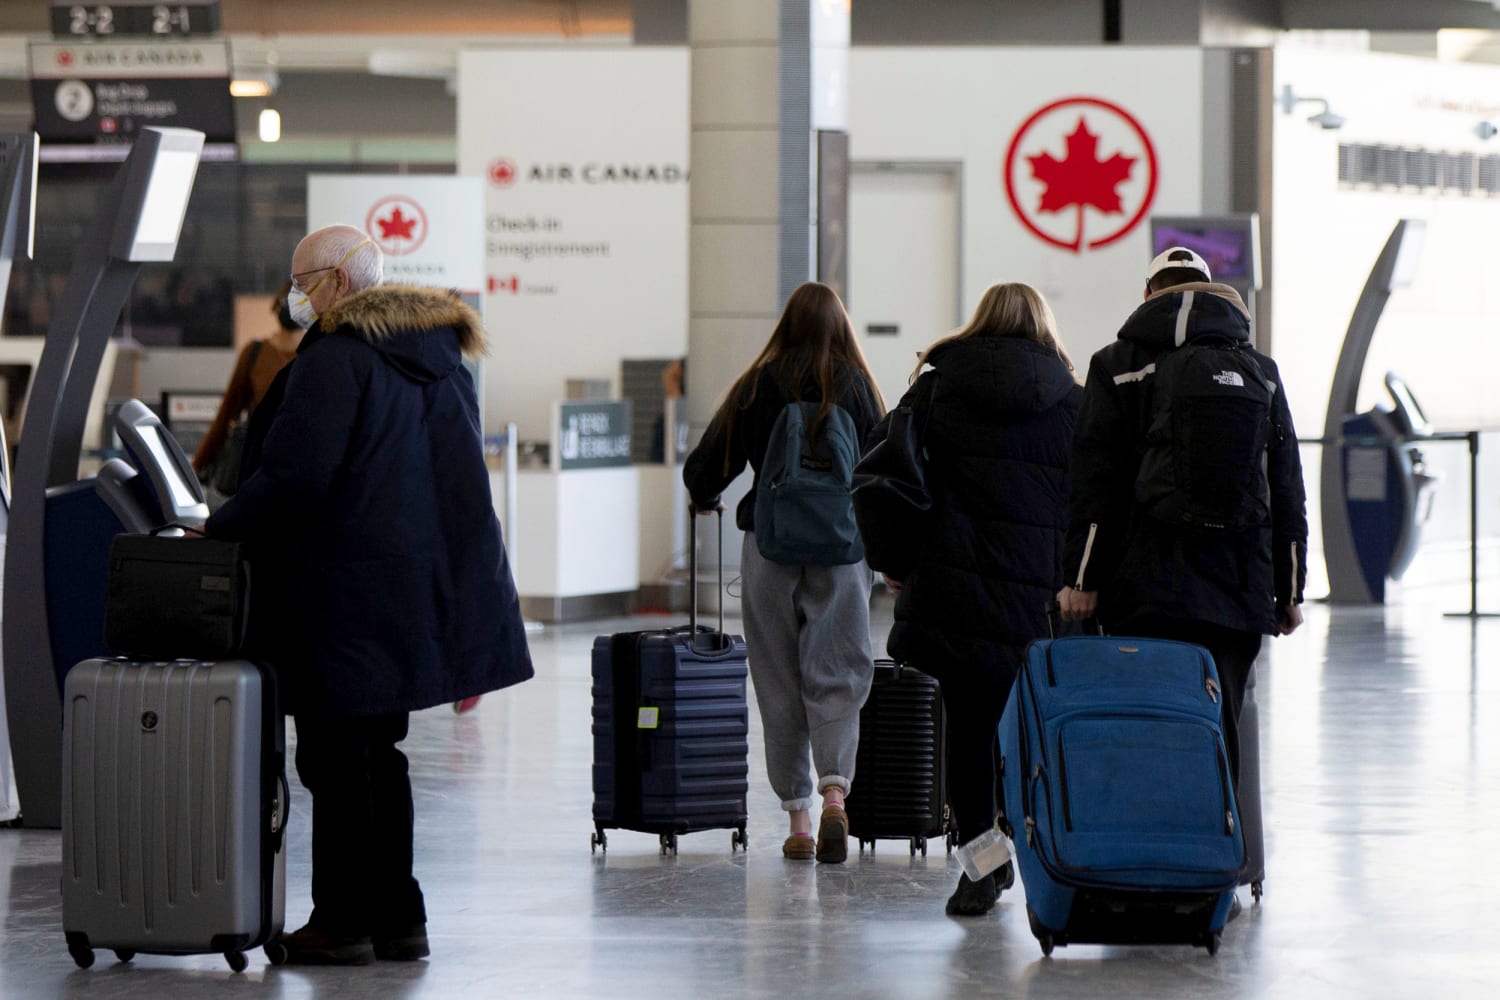 U.S. issues ‘Do Not Travel’ warning for Canada amid Covid rise